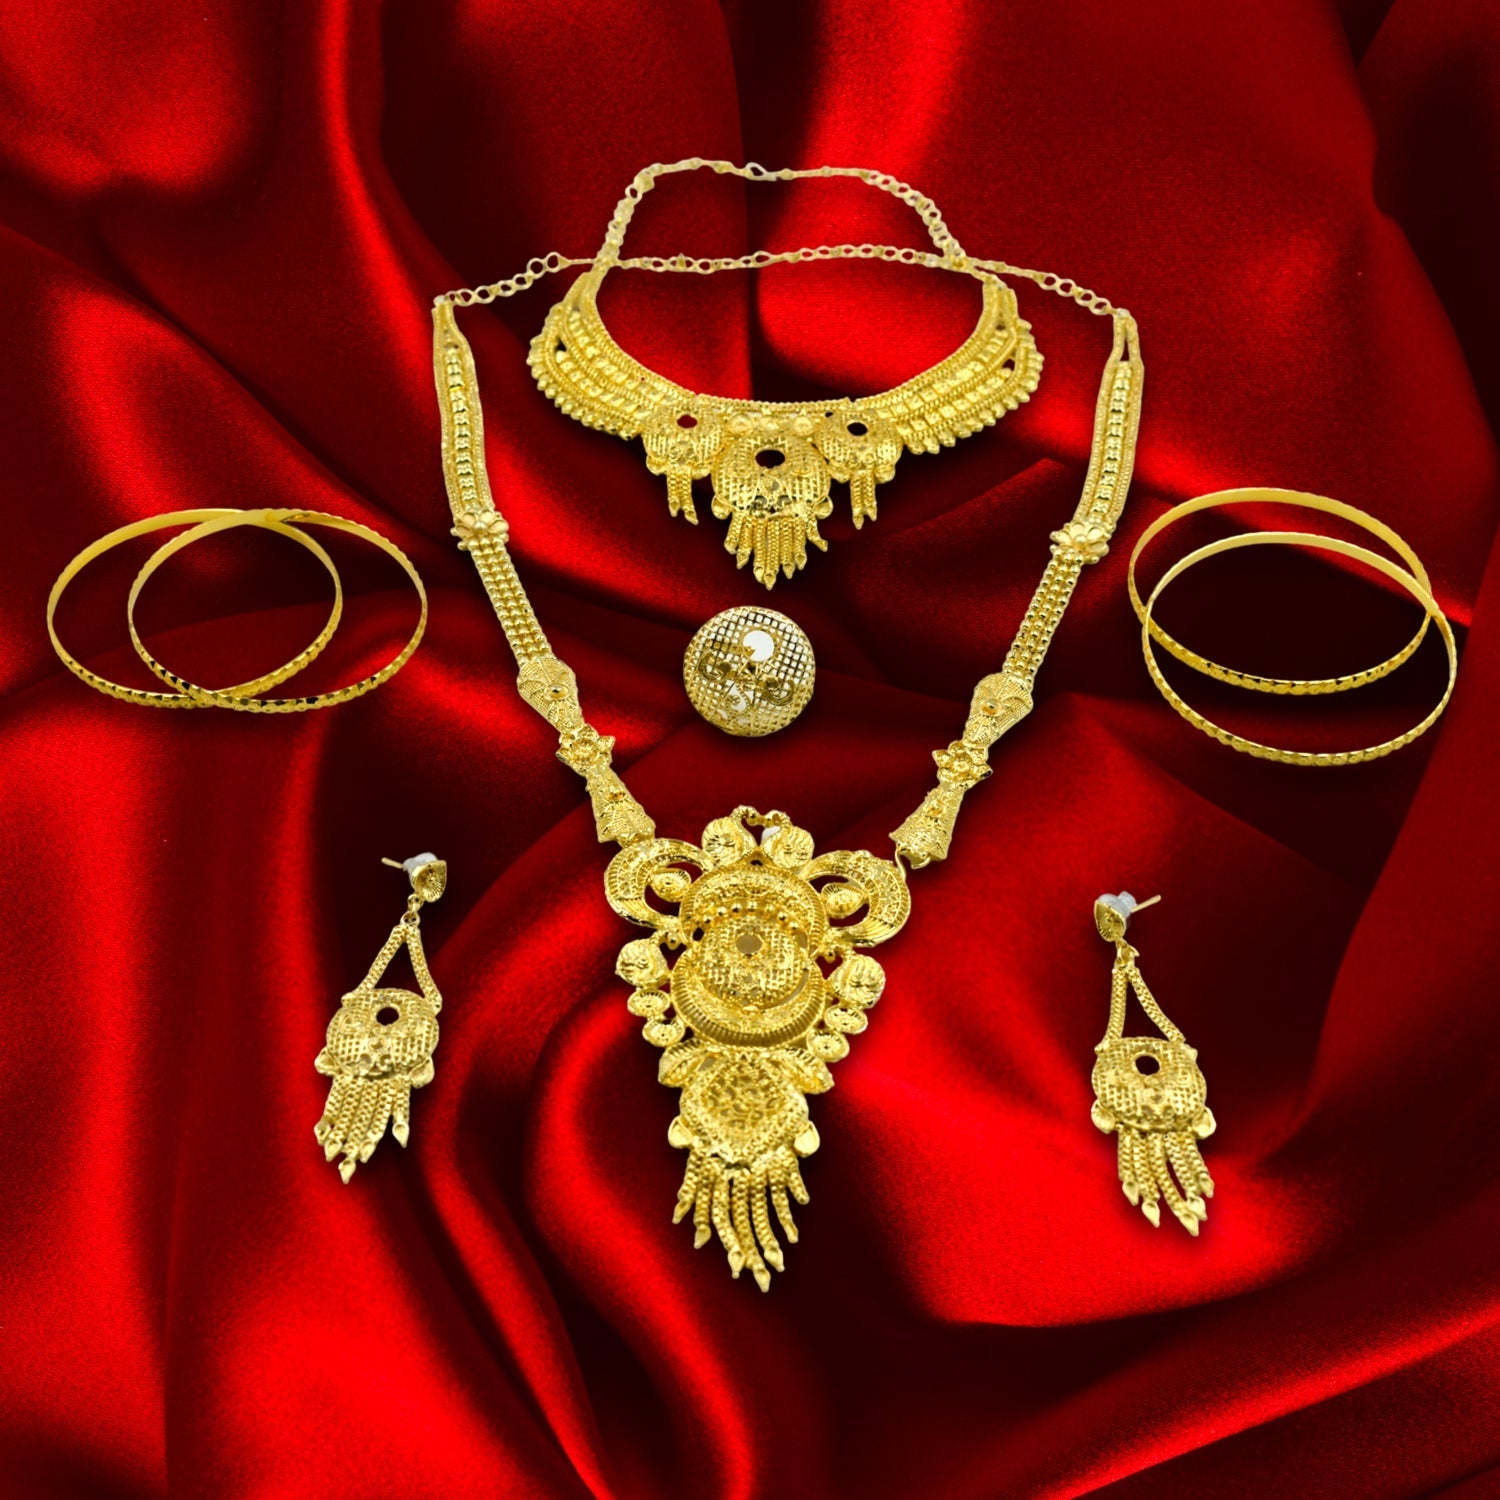 6301 Bridal Jewellery Set and collection for bridal attire and outlook purposes.